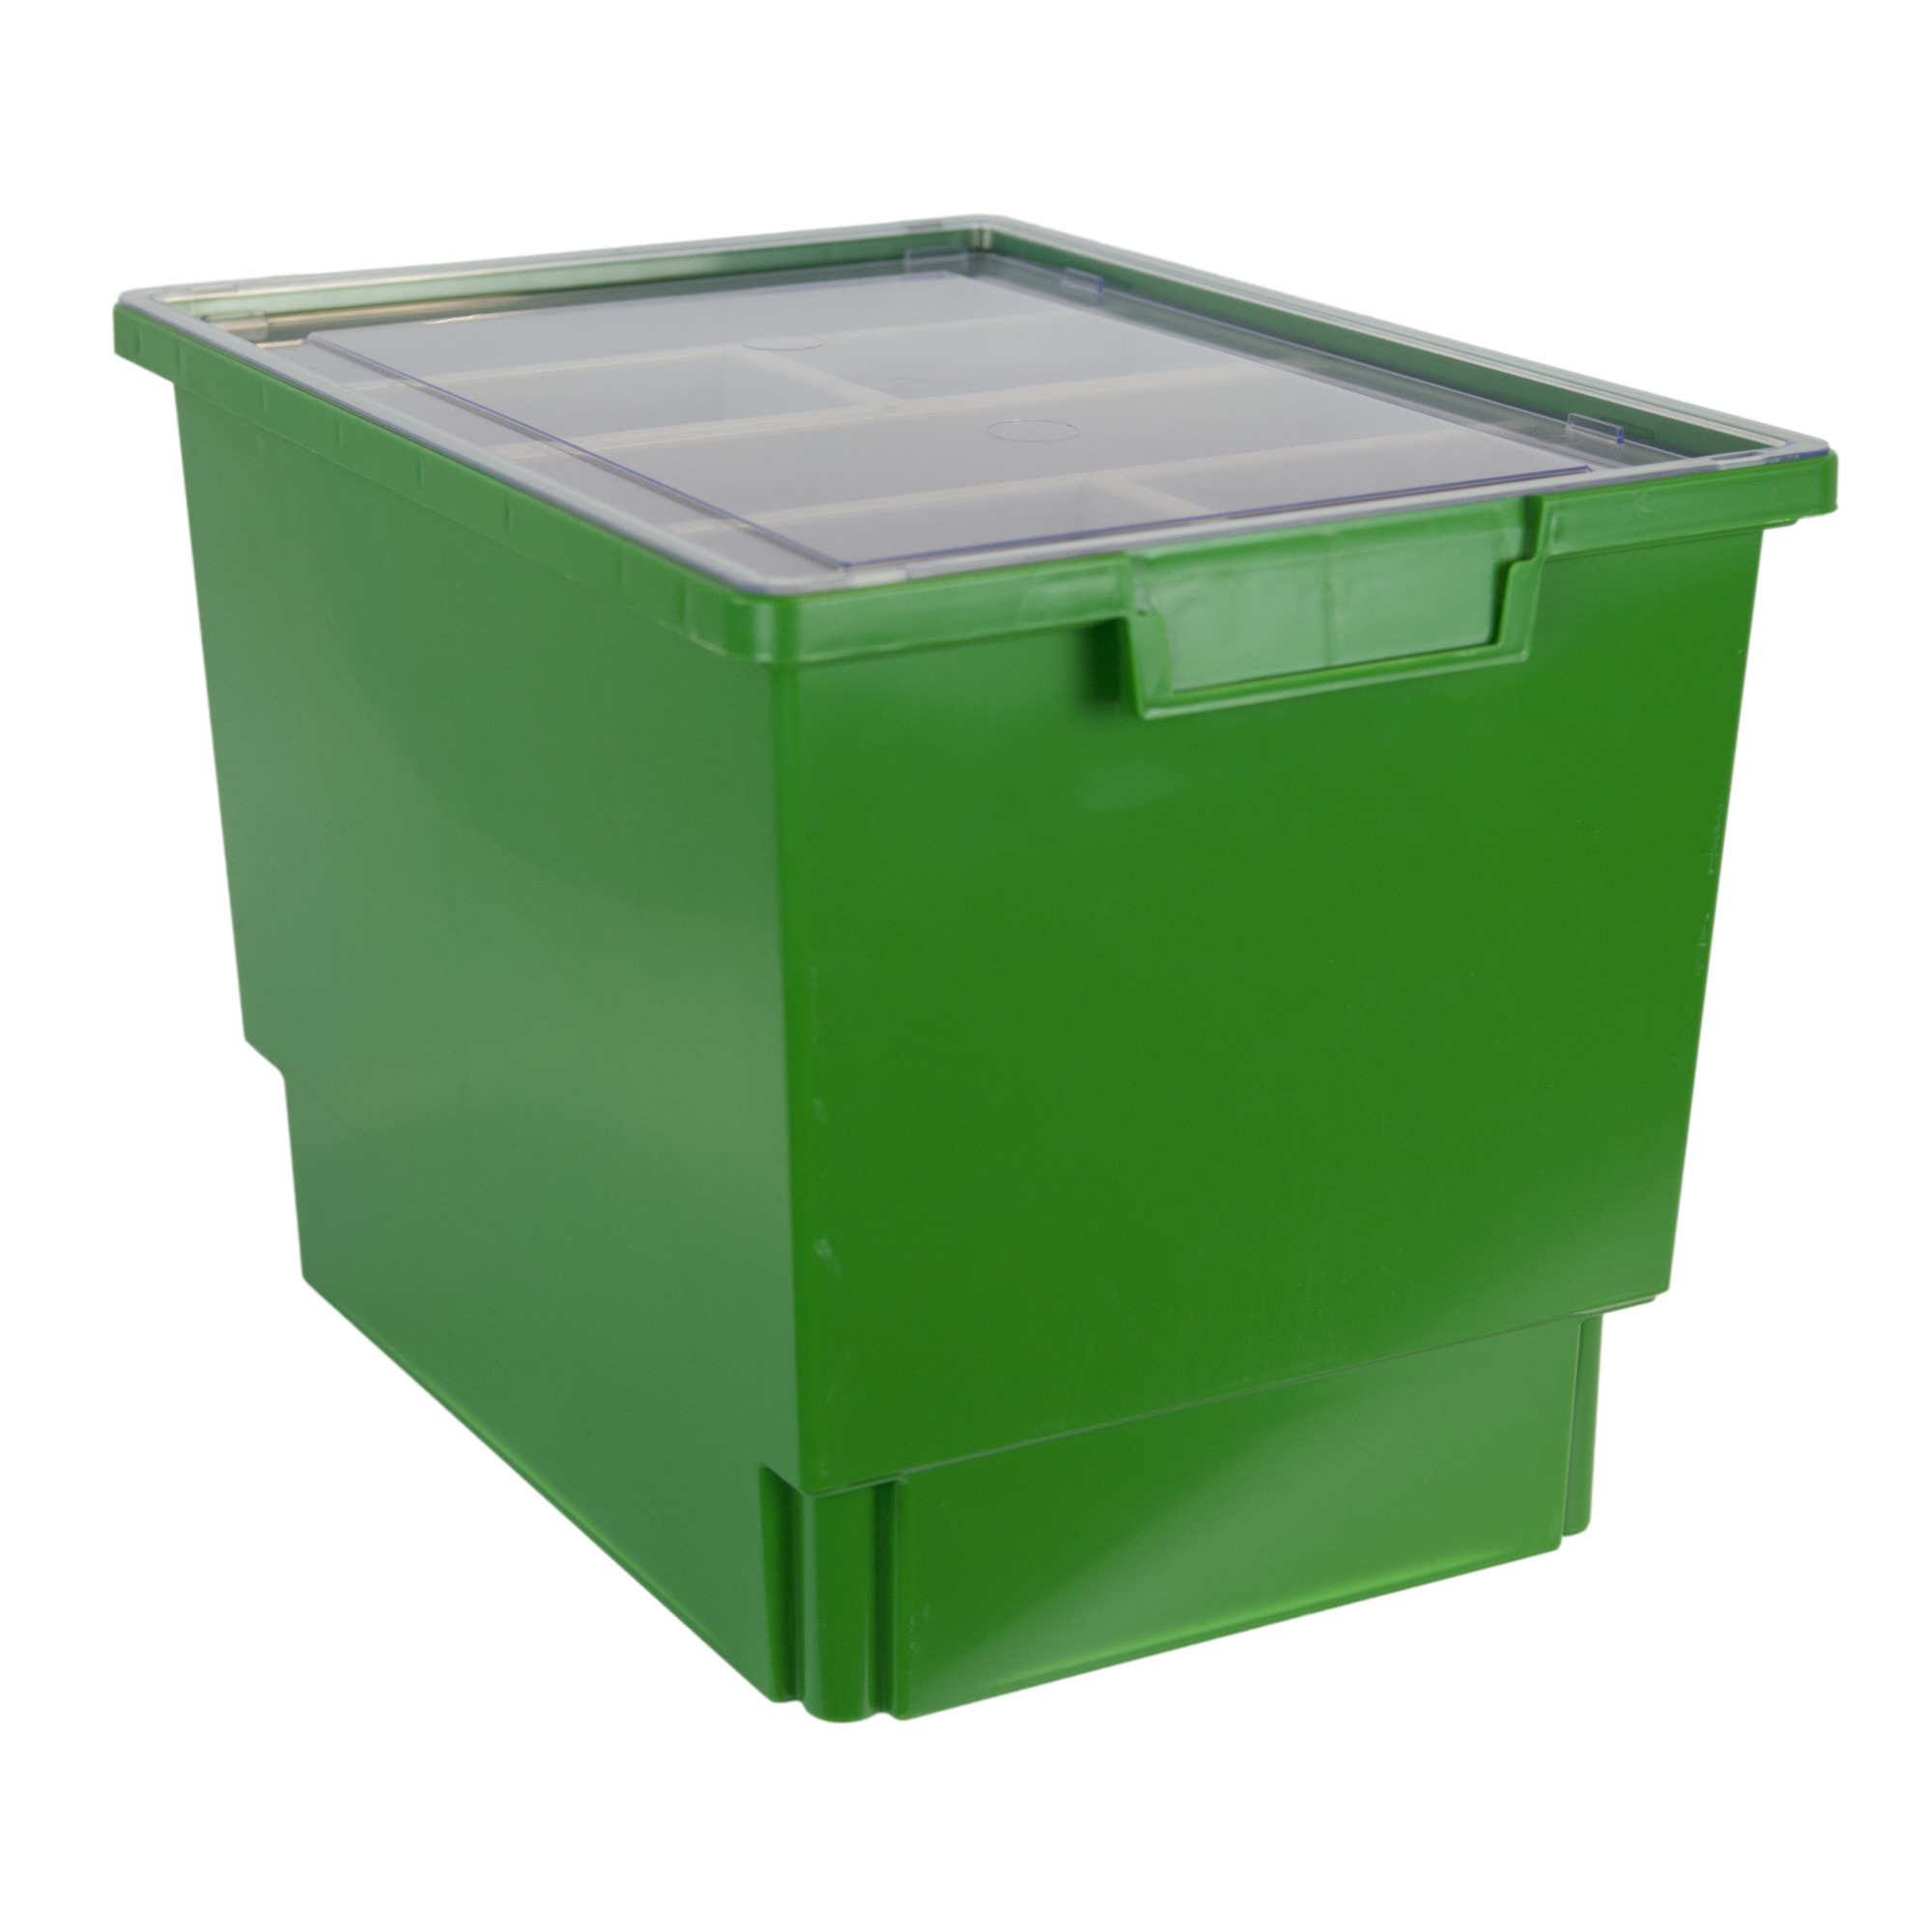 Certwood StorWerks, Slim Line 12Inch Tray Kit (3 x Divisions) Green-3PK, Included (qty.) 3, Material Plastic, Height 12 in, Model CE1954PG-NK0202-3